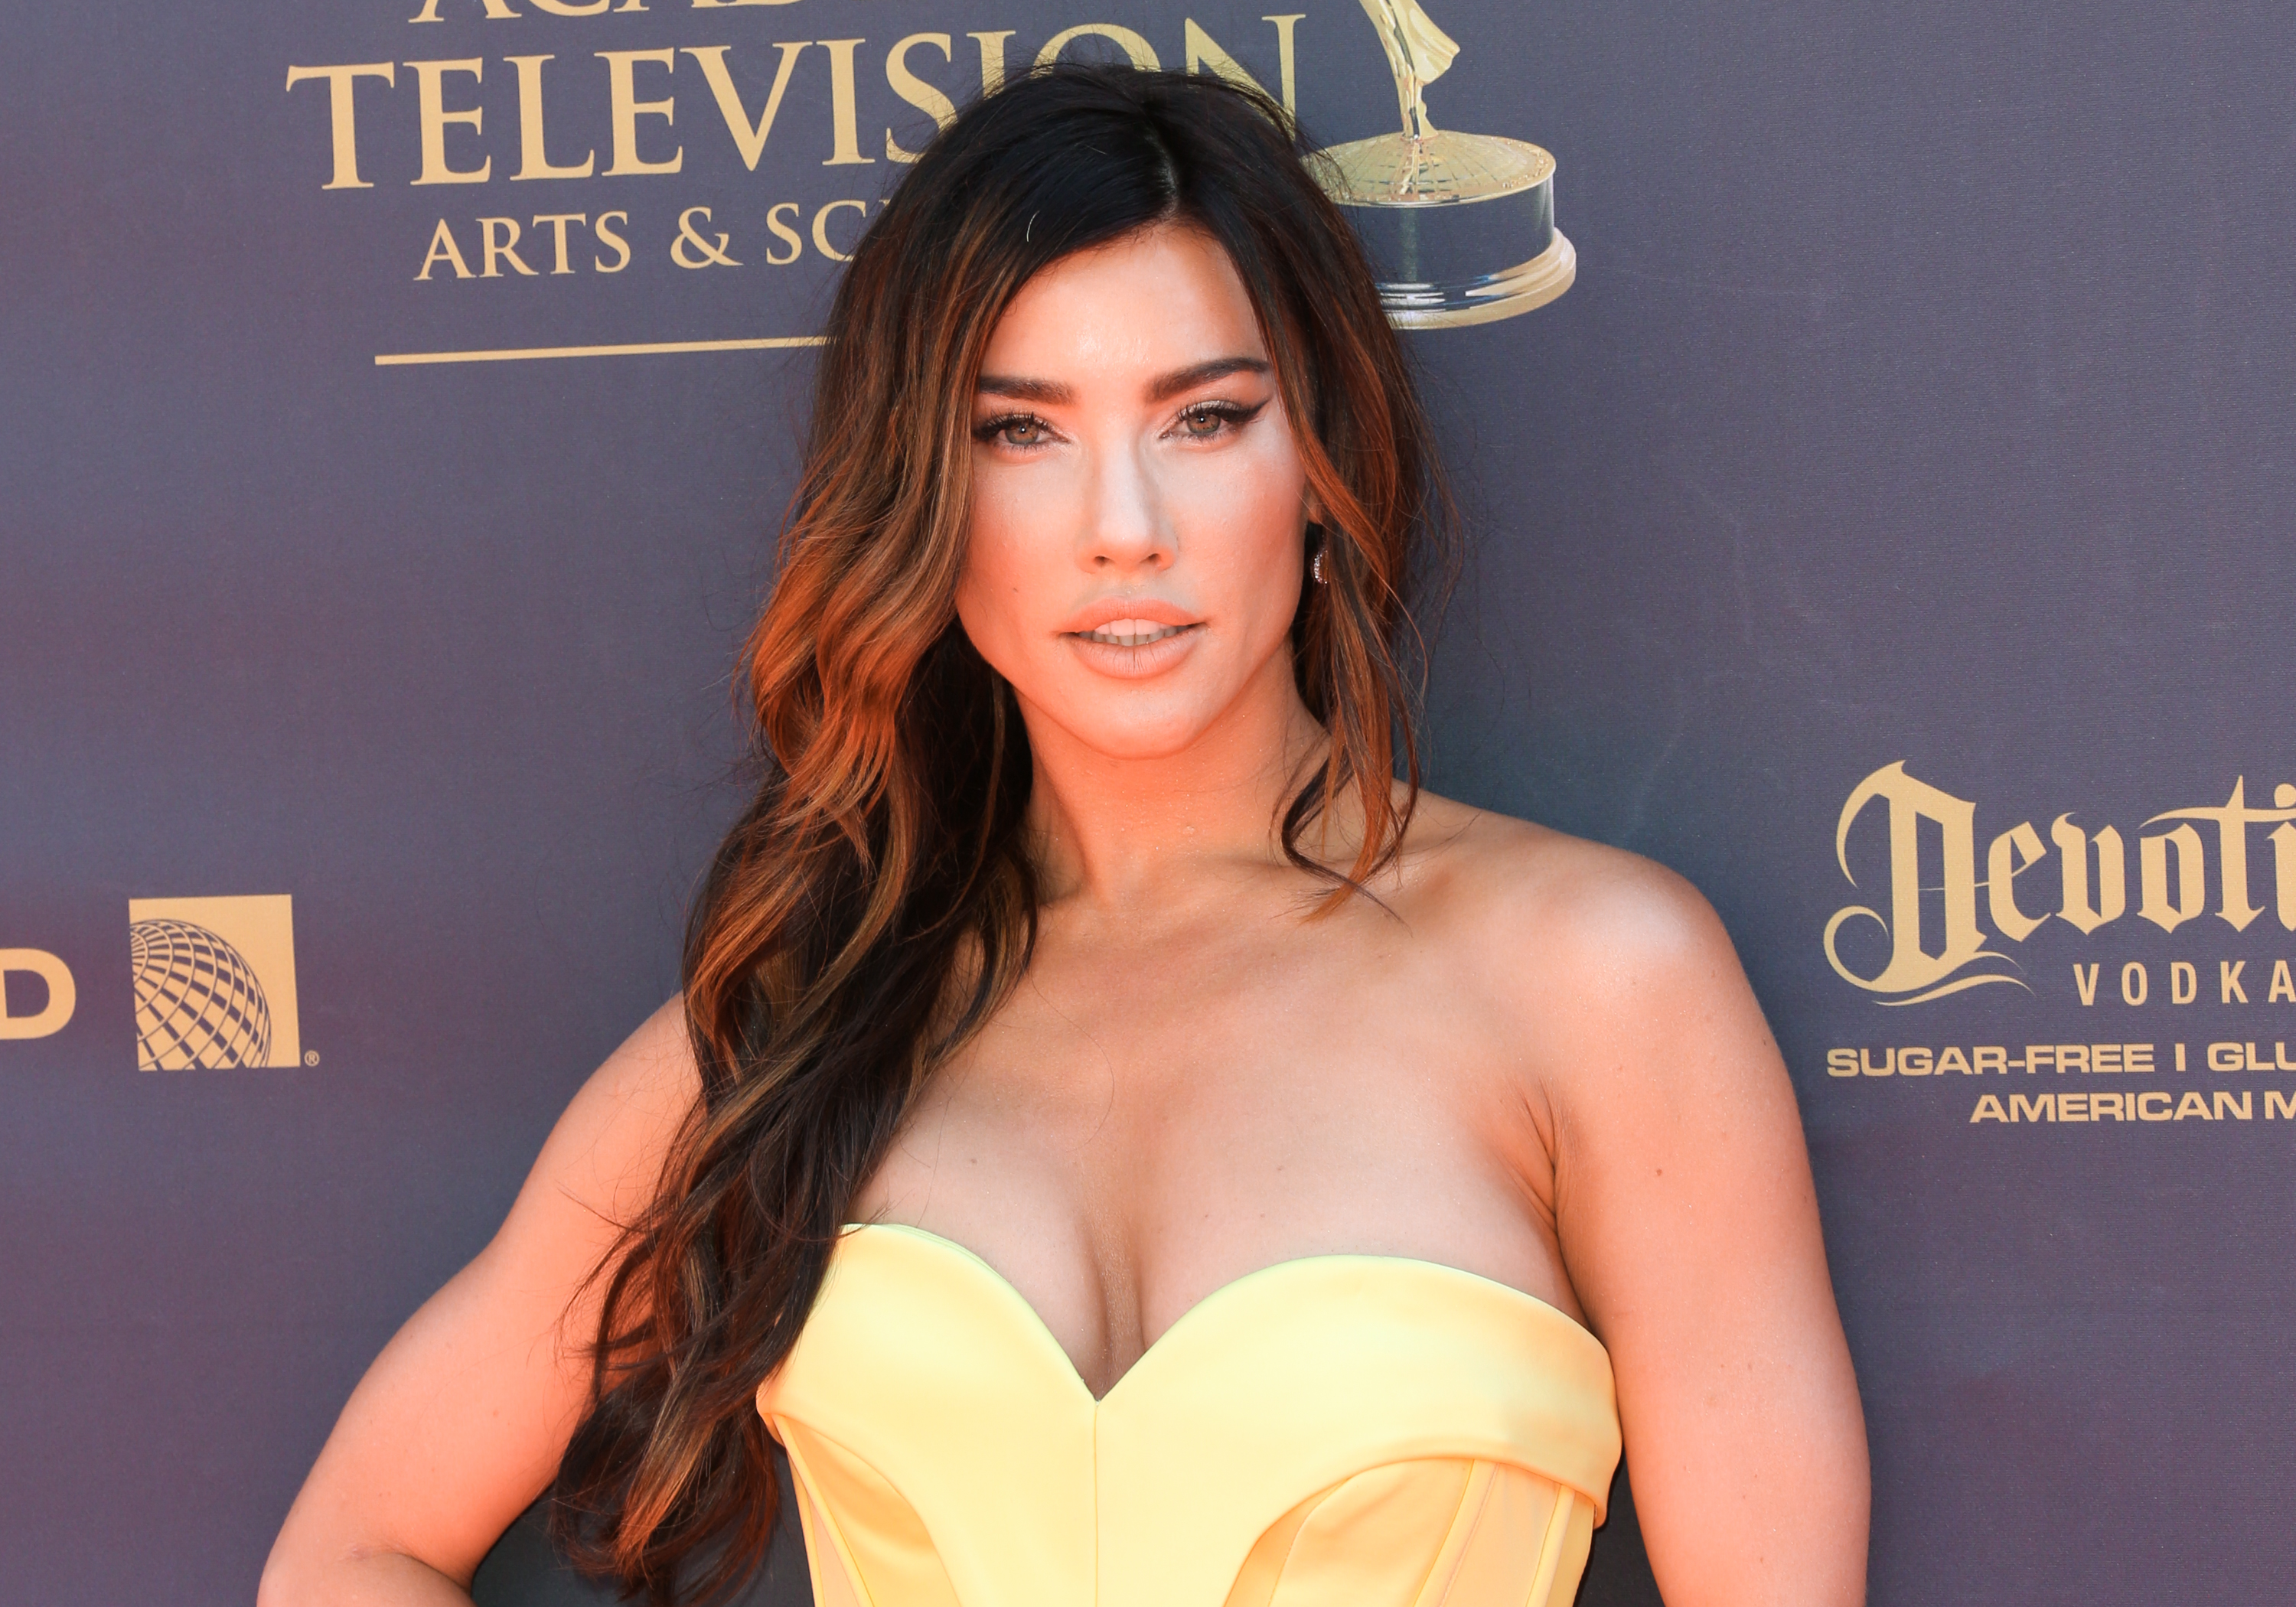 'The Bold and the Beautiful' spoilers indicate Steffy Forrester confronts her mother-in-law Li Finnegan.